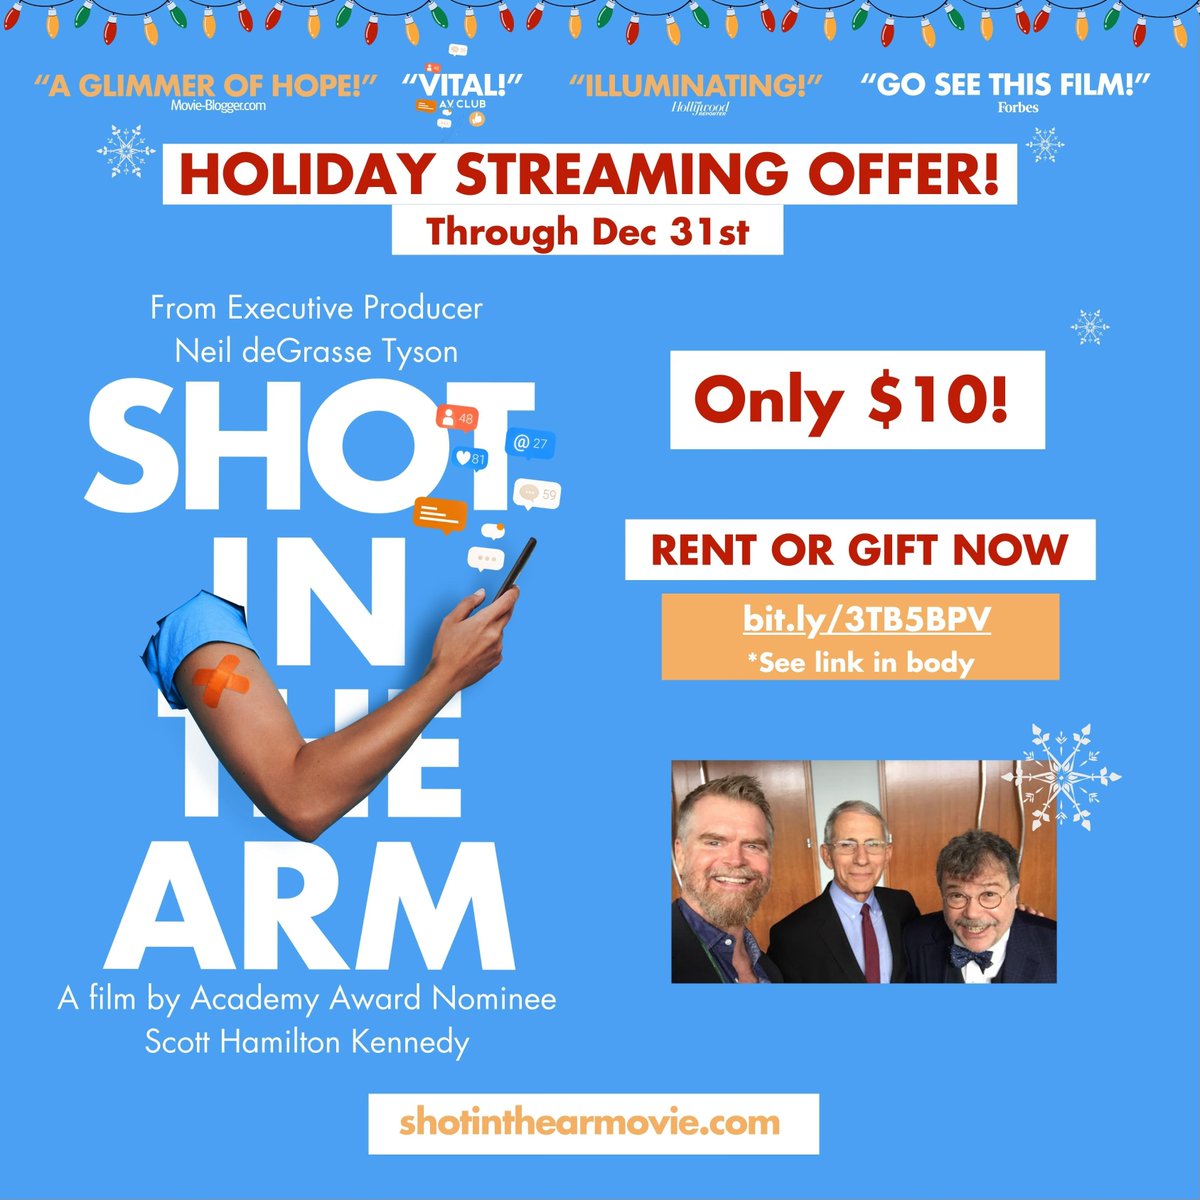 If you missed last week’s free screening of Shot In the Arm, now thru Dec 31, you can gift a private viewing — to yourself, or others.

The documentary, by @ScottHamiltonKennedy, looks compassionately at how anti-science thinking feeds vaccine hesitancy.

bit.ly/3TB5BPV